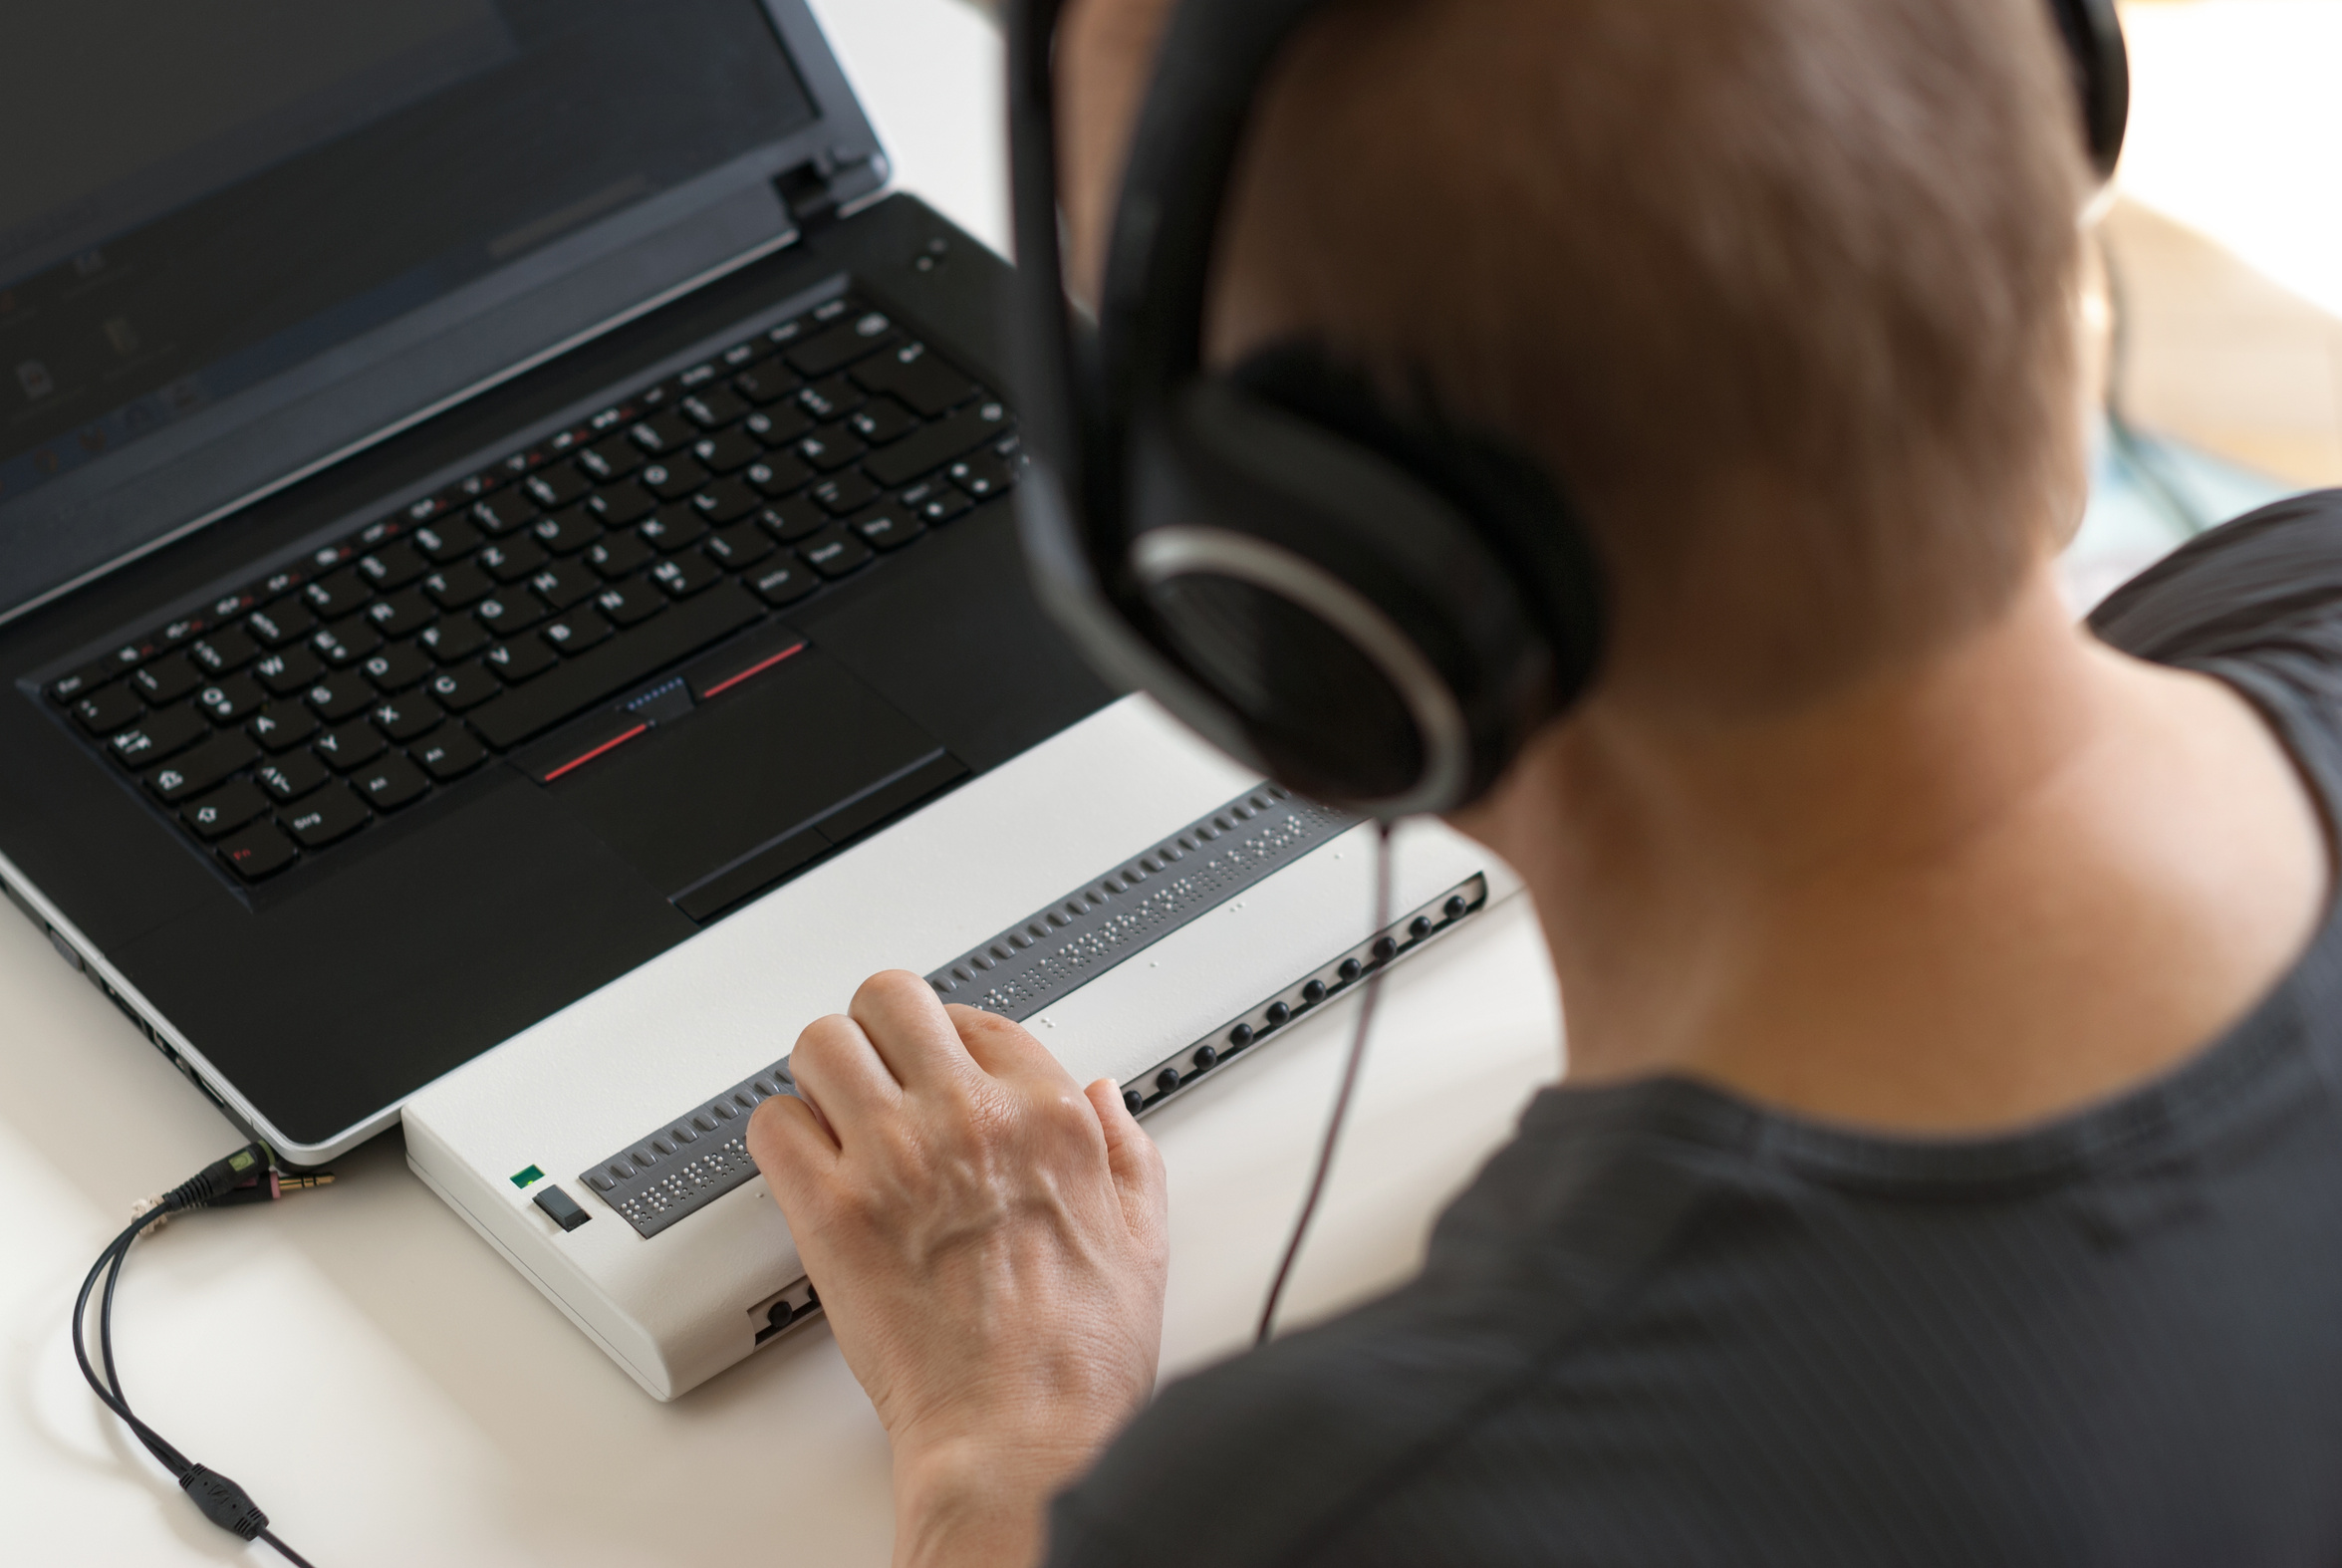 Braille keyboard and headphones